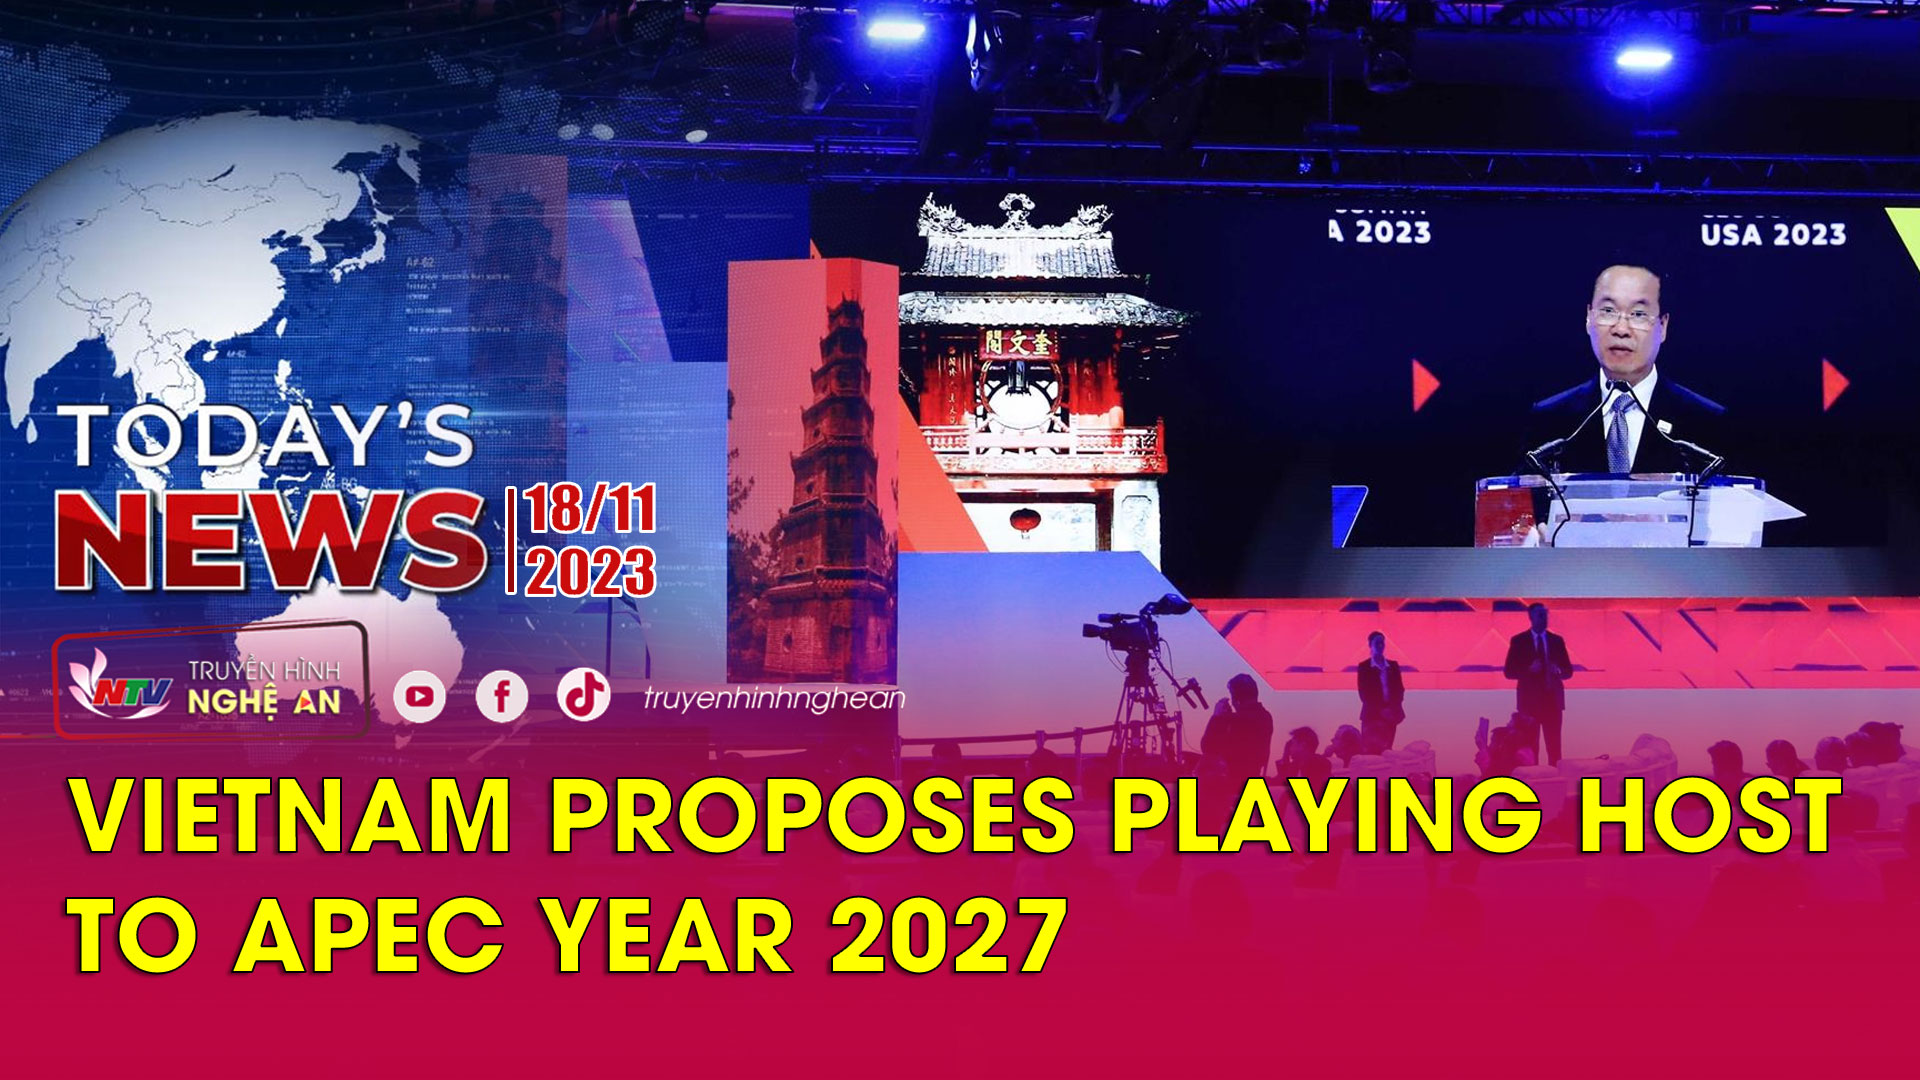 Today's News - 18/11/2023: Vietnam proposes playing host to APEC Year 2027